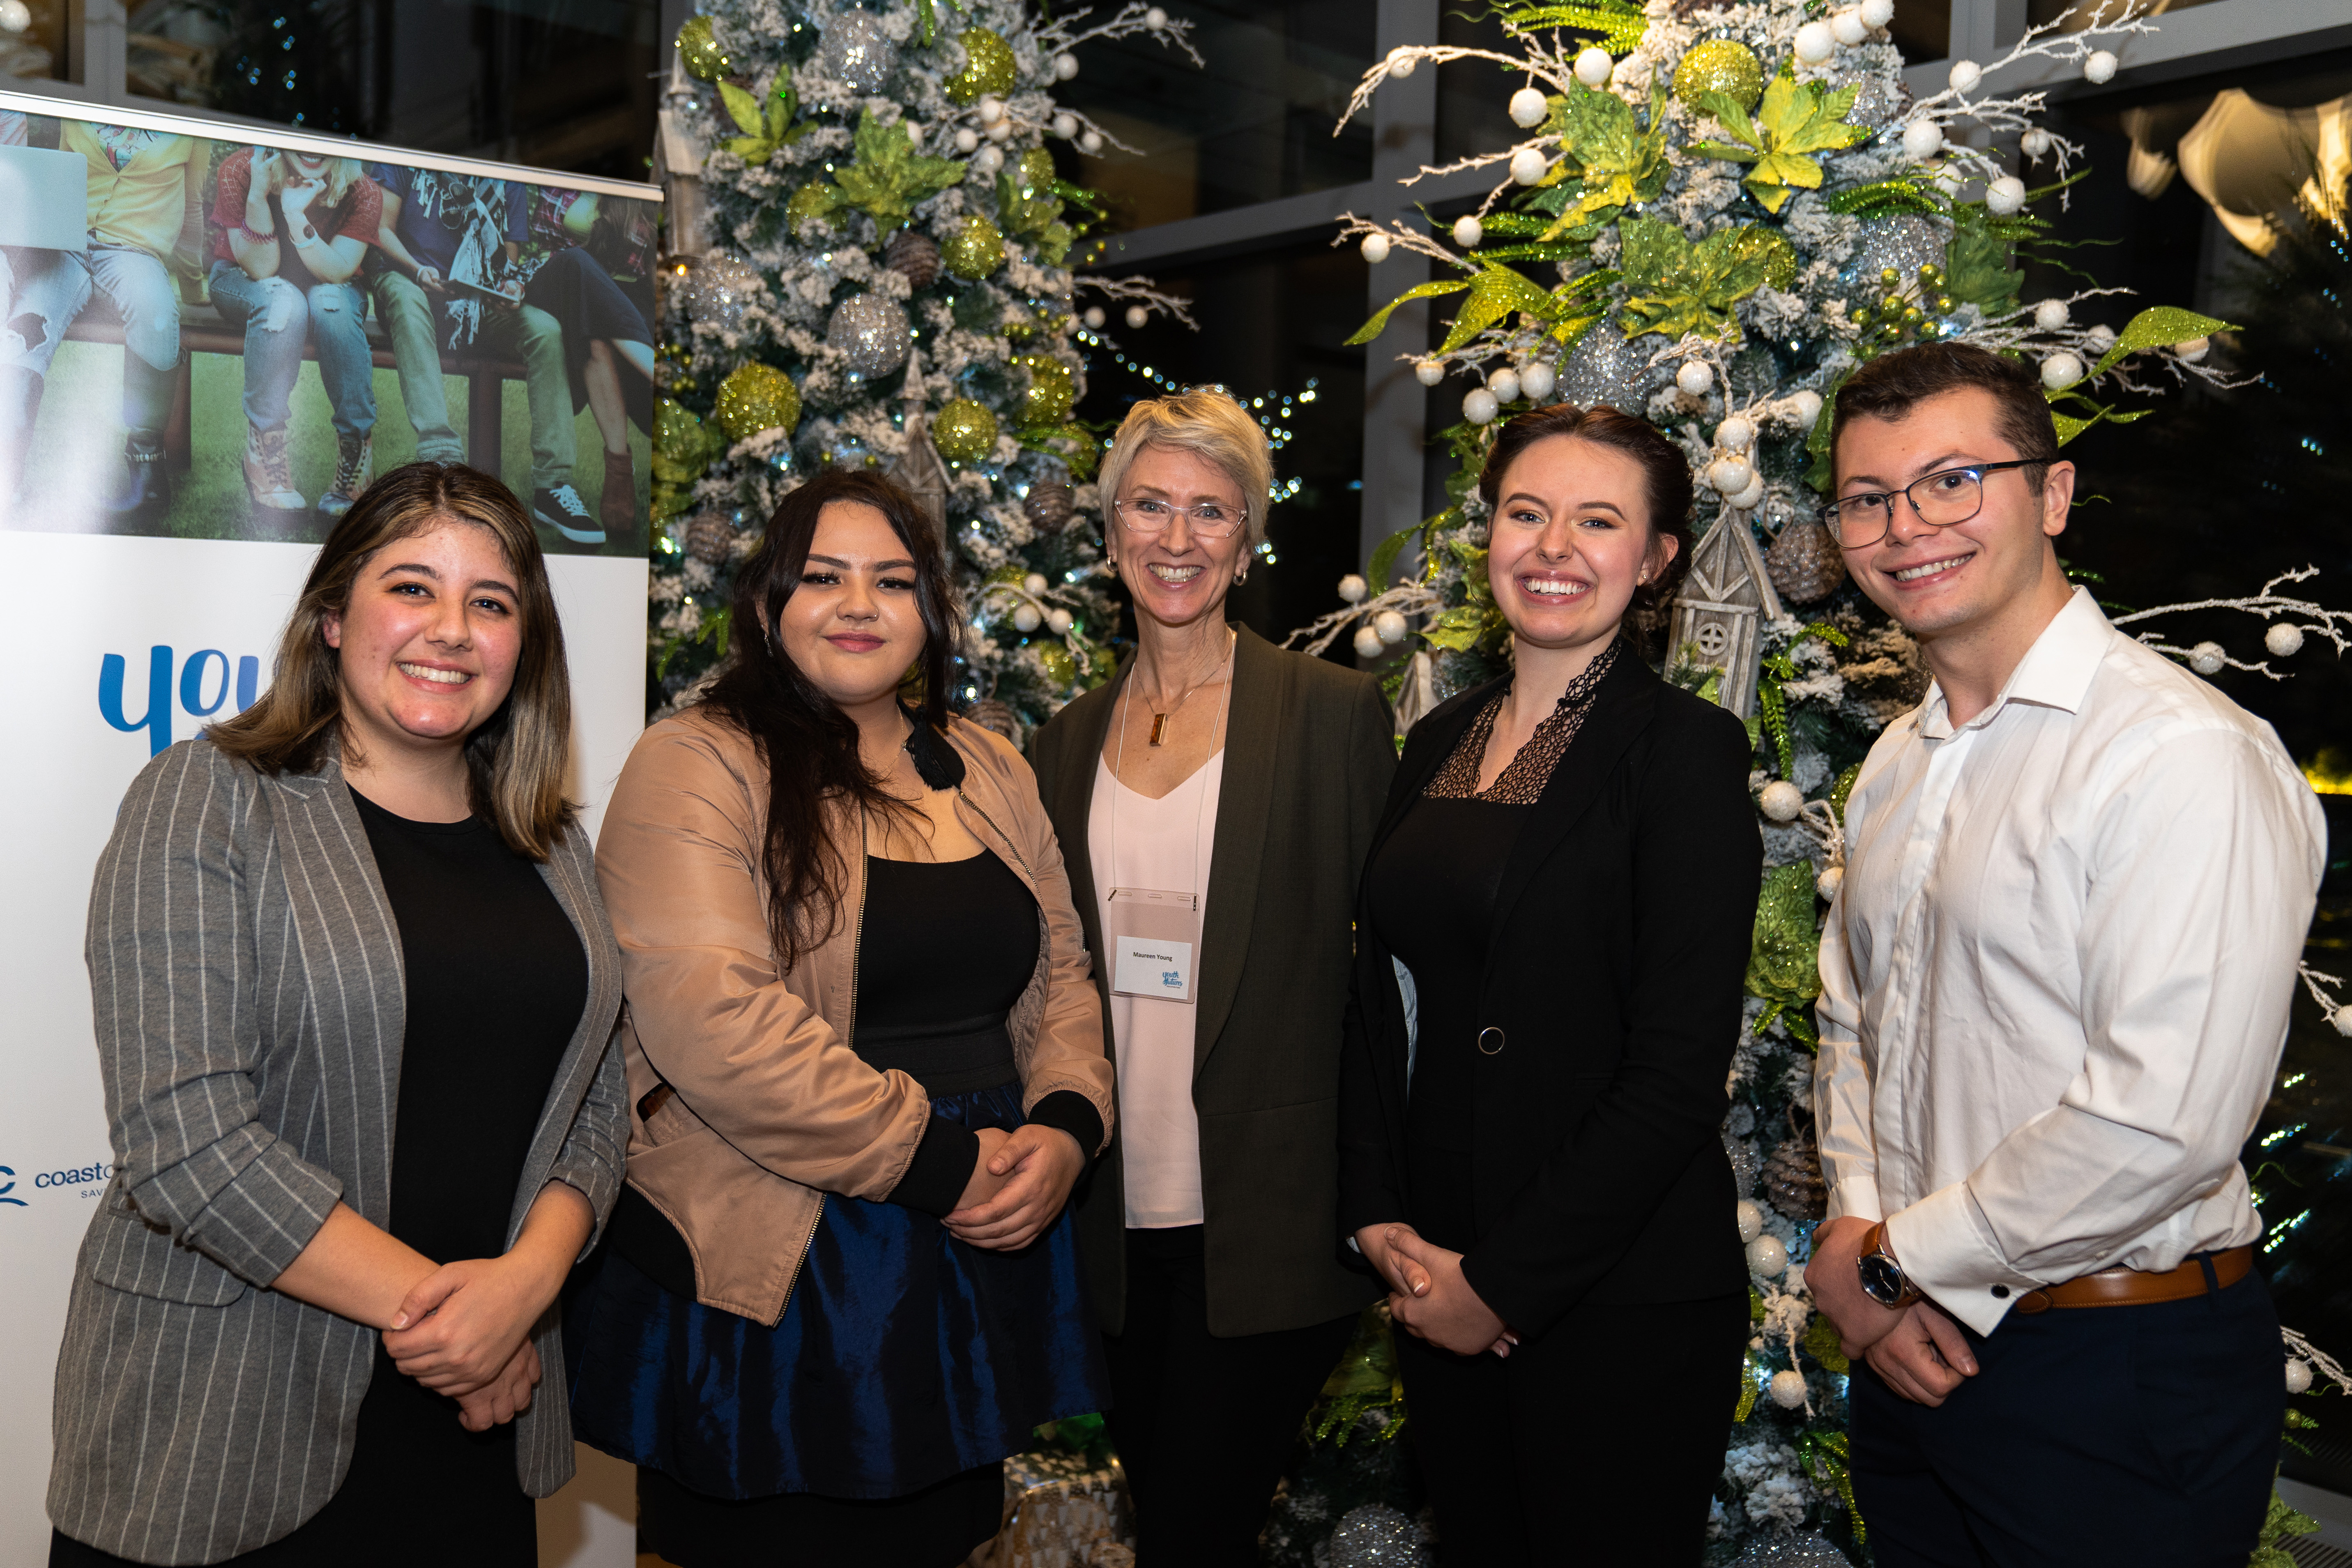 The unprecedented $600,00 figure was announced at an event December 10, 2019. From left to right: Soraya Bellou and Jodi Dekker (former youth in care, students); Maureen Young, Chair Youth Futures Education Fund and Director of Community Leadership, Coast Capital Savings); Mallory Woods and Nathaniel Andre-Peirano (former youth in care, students).